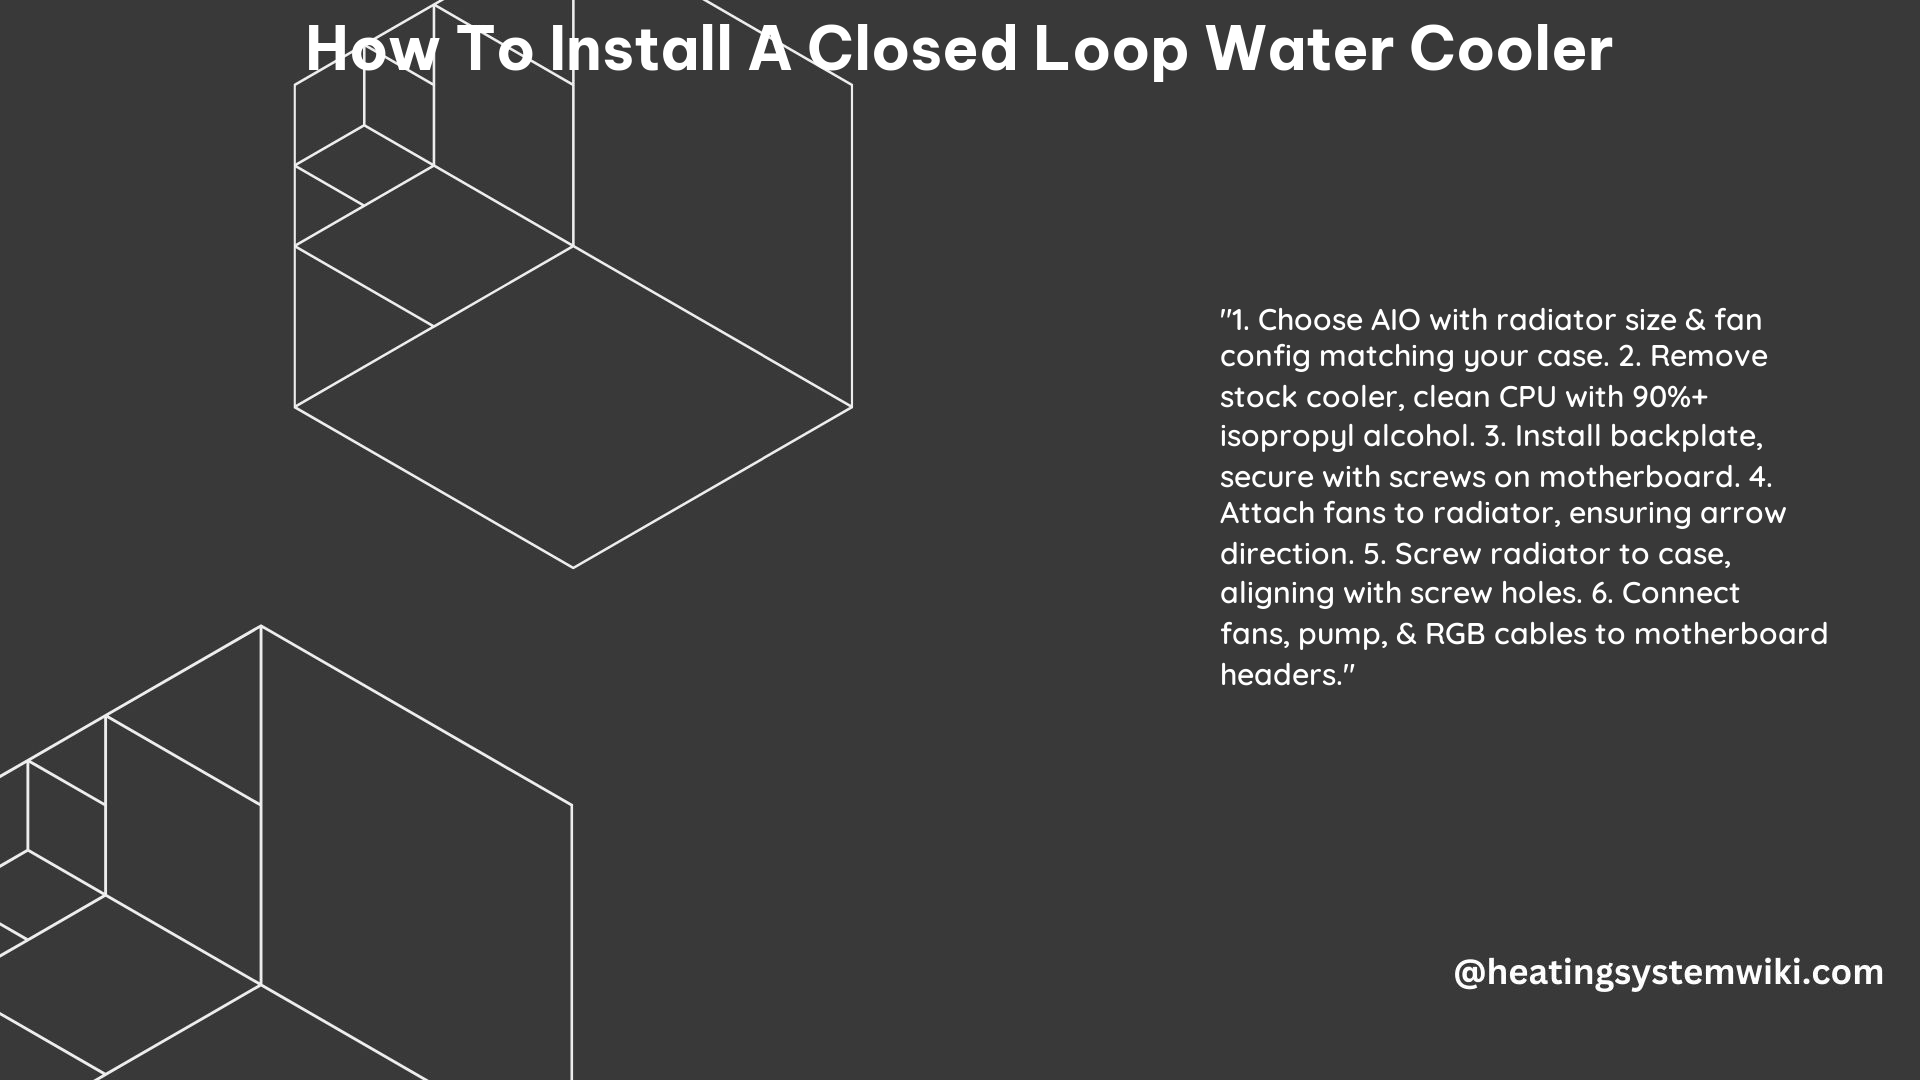 How to Install a Closed Loop Water Cooler